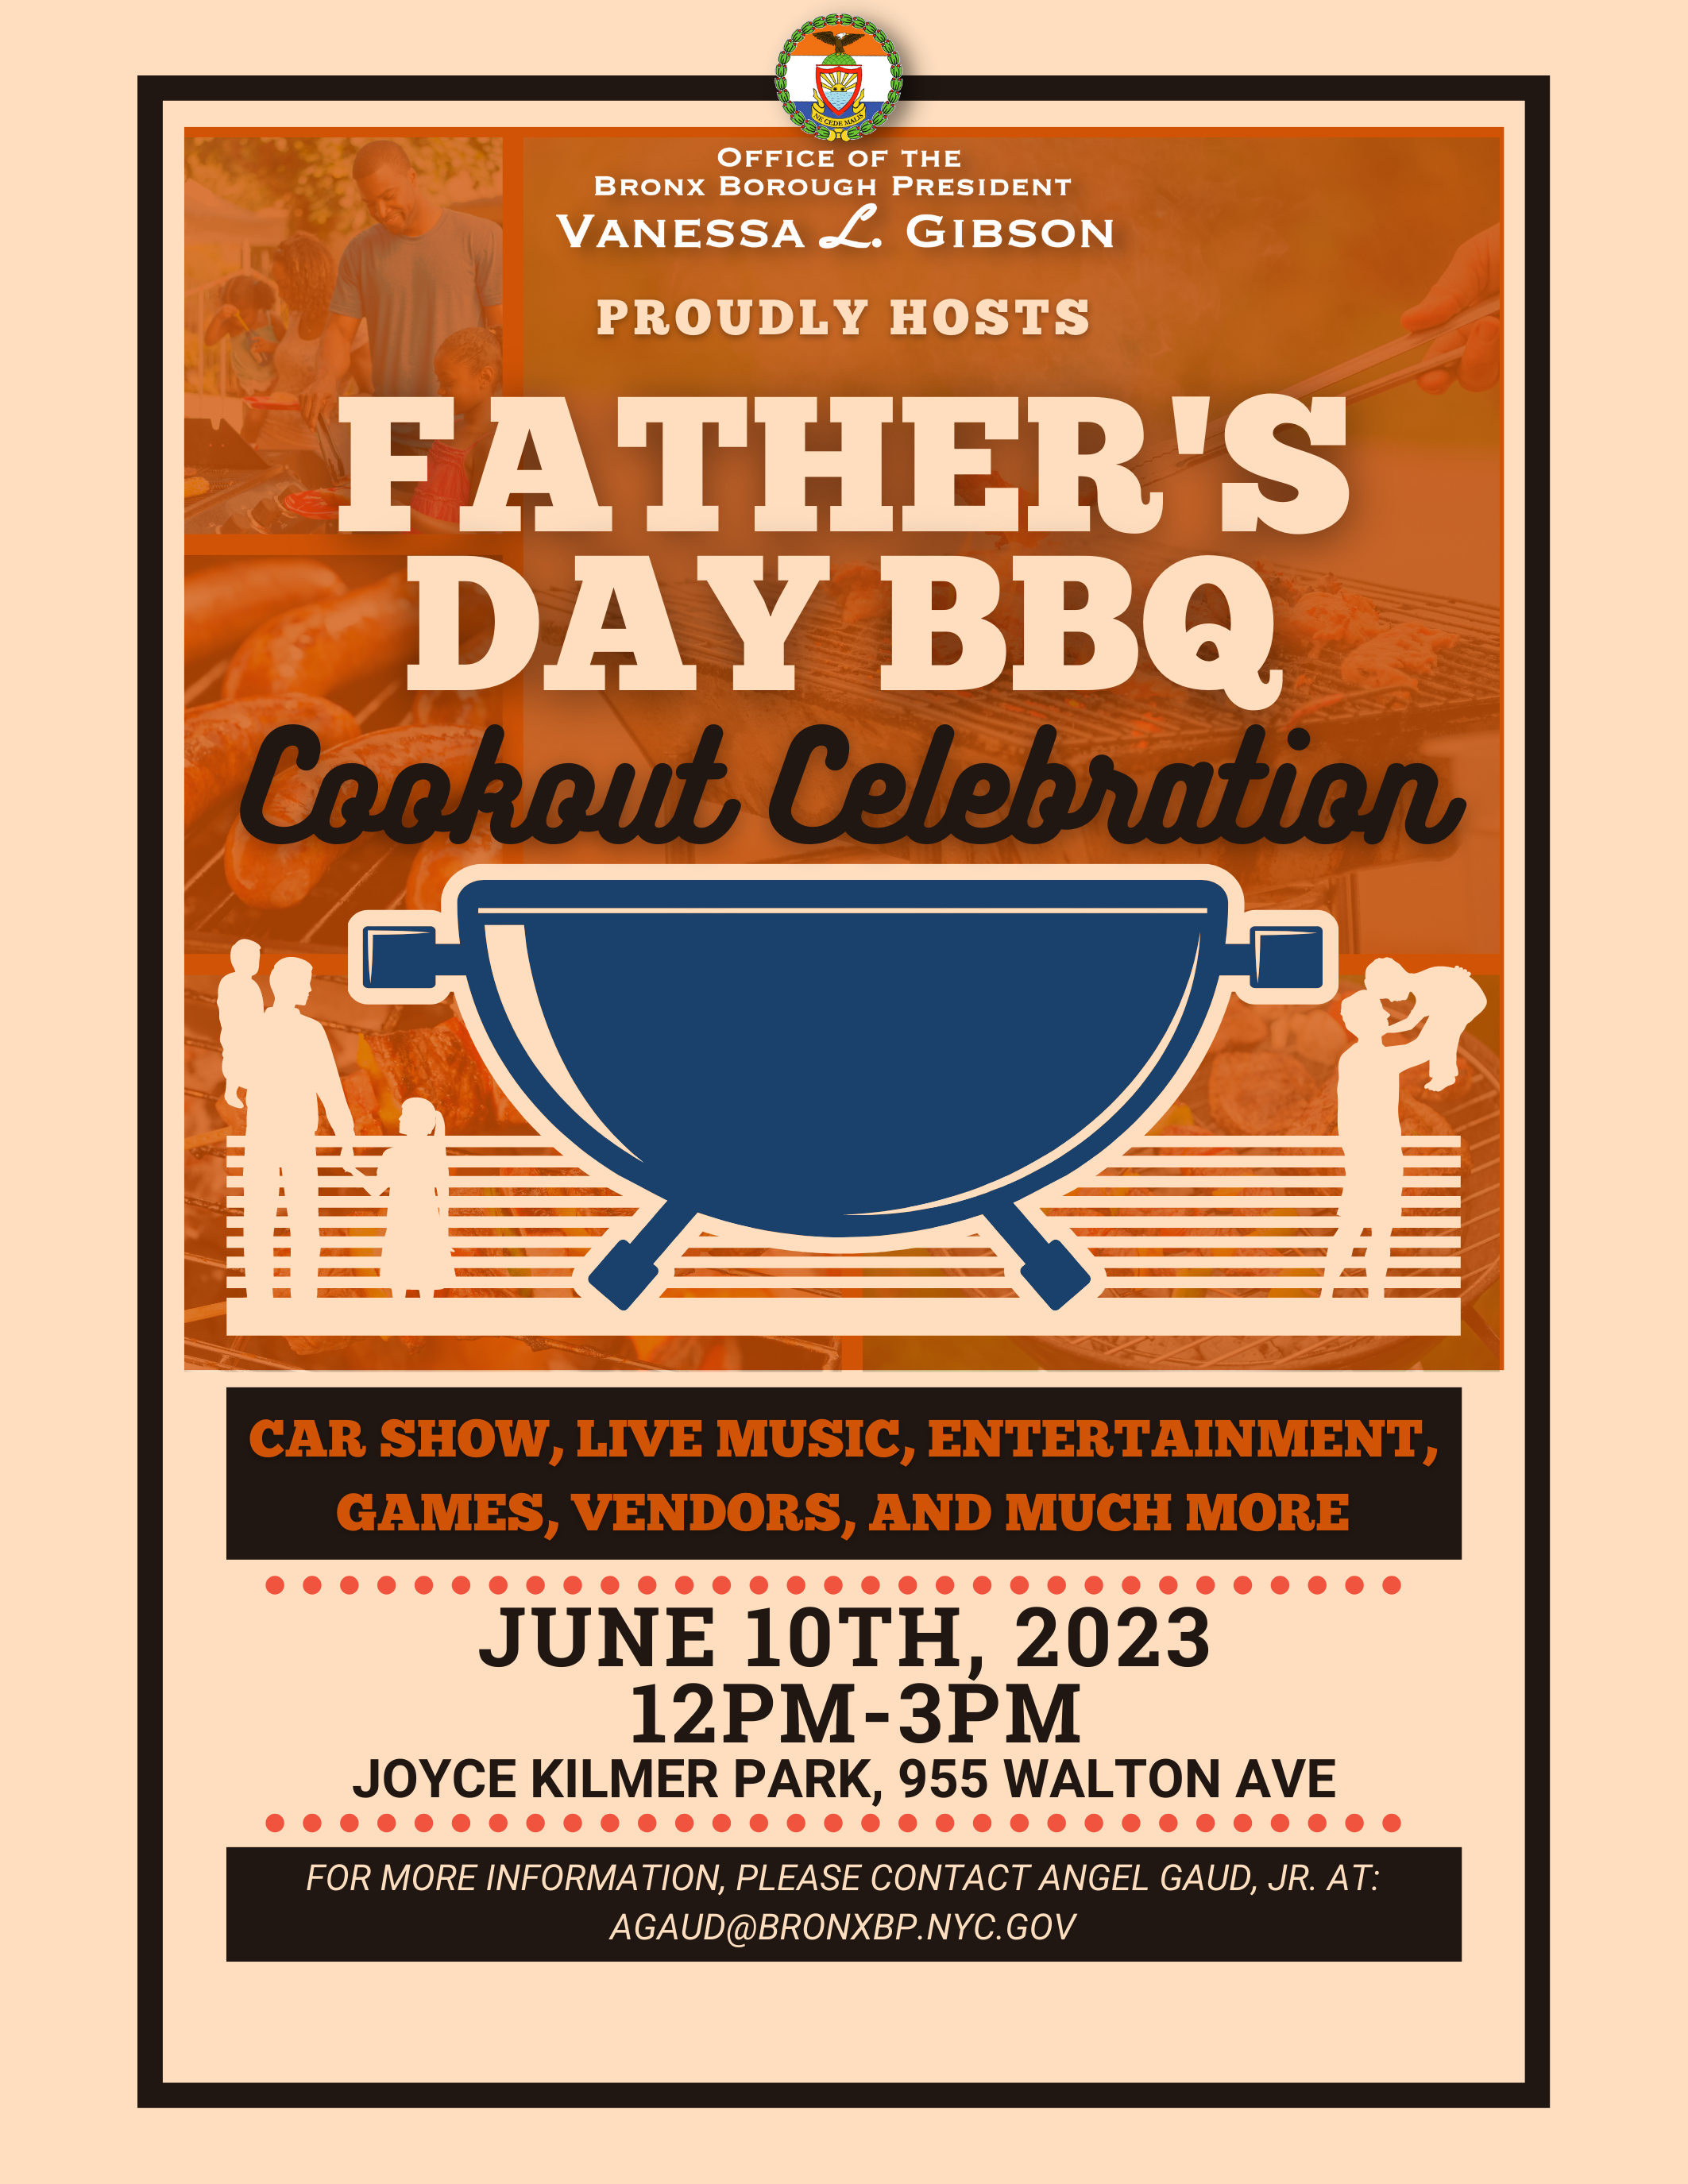 A flyer for BP Gibson's Father's Day BBQ Cookout Celebration on June 10, 2023.